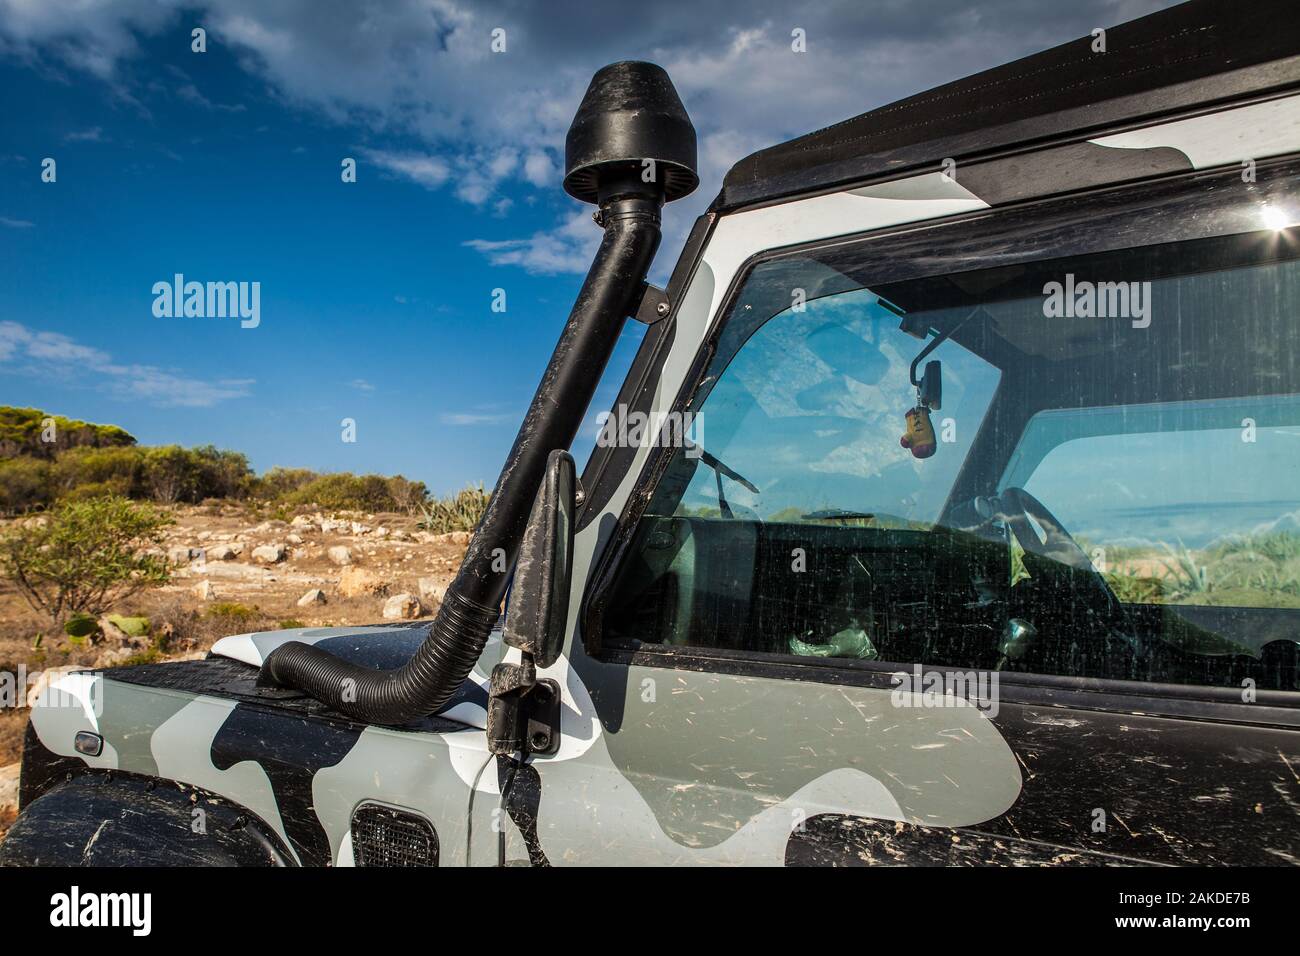 Off roading detail Stock Photo